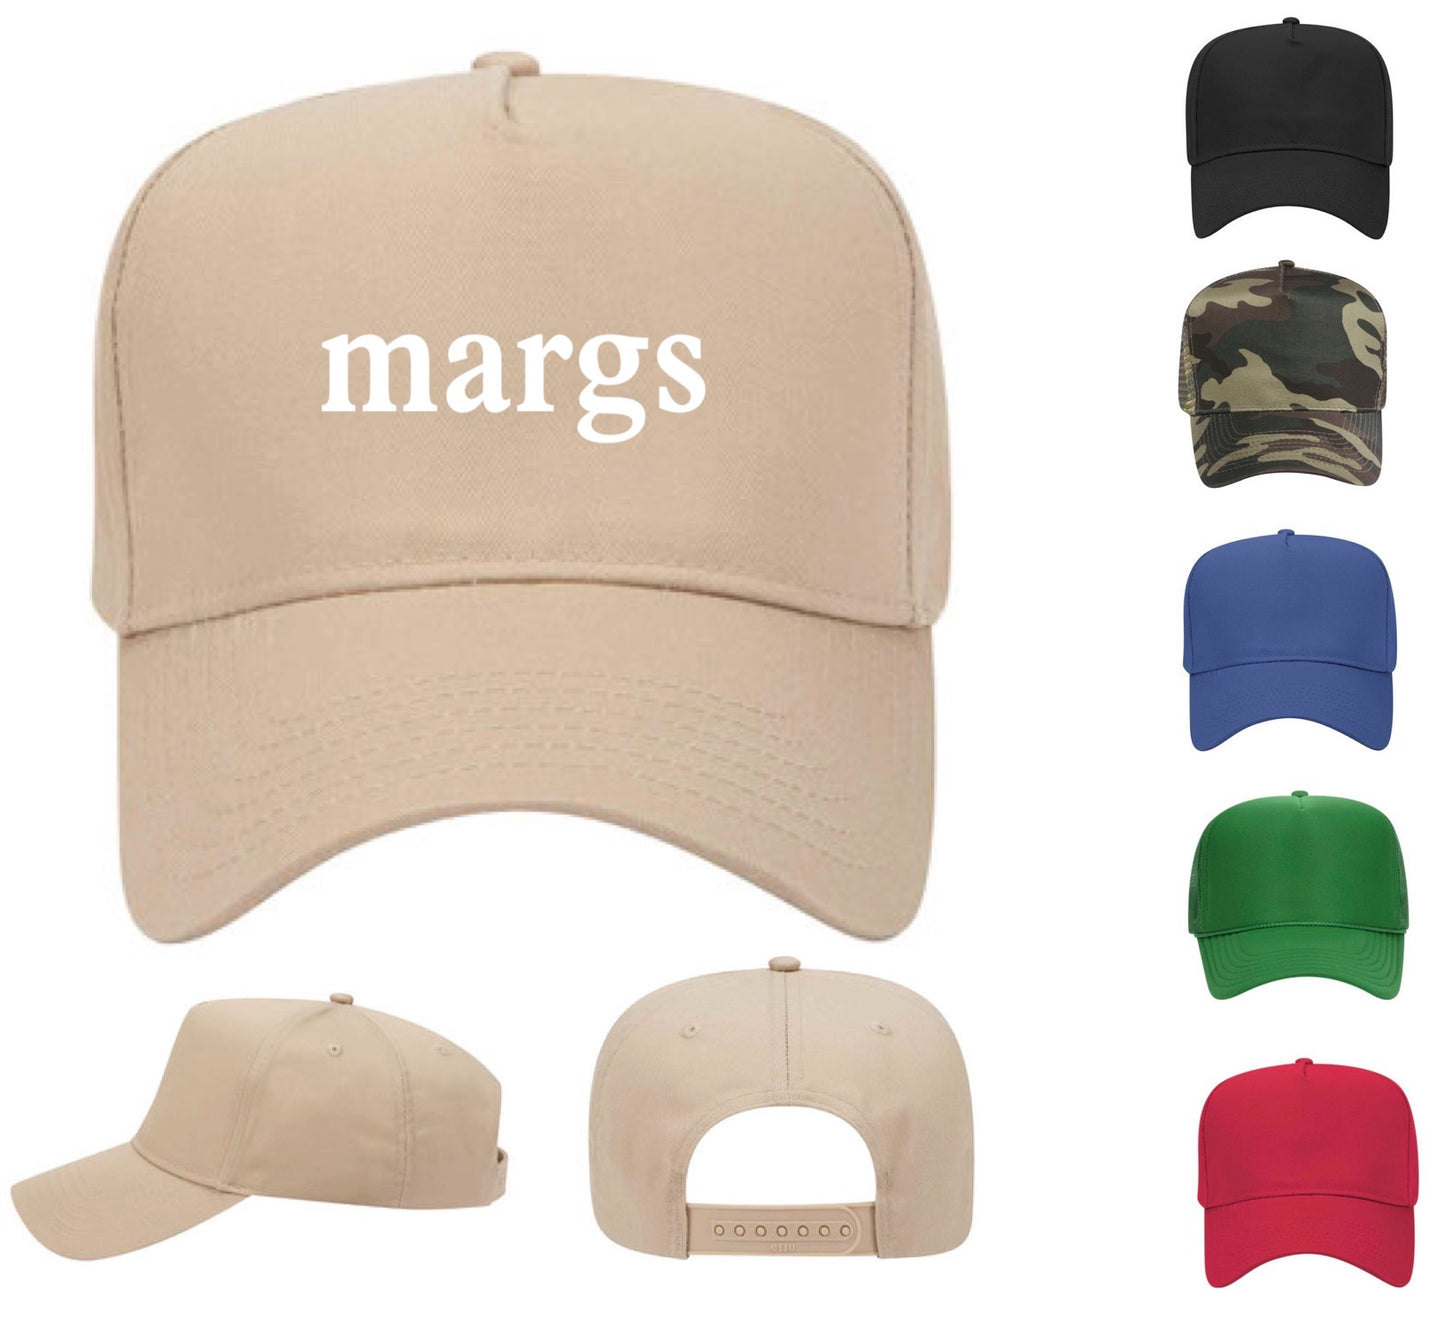 Margs Hat (FREE Shipping)